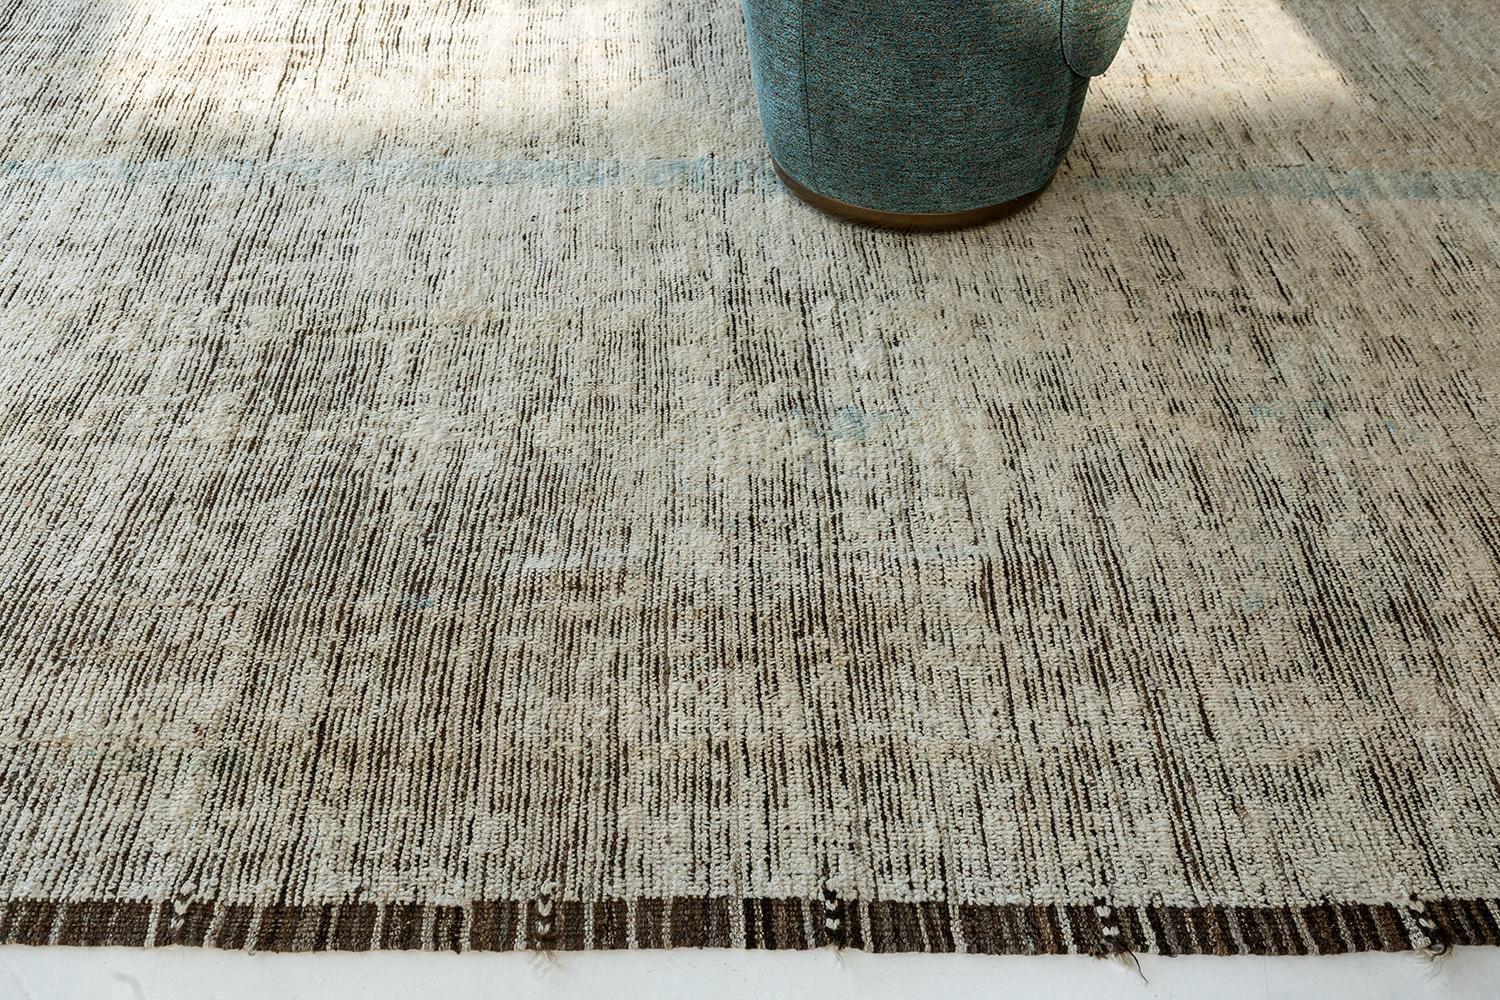 Admirable Earth Tones Decorative Modern Distressed Rug, Country of Origin: Afghanistan, Circa Date: Modern. 9 ft 8 in x 13 ft 4 in (2.95 m x 4.06 m)